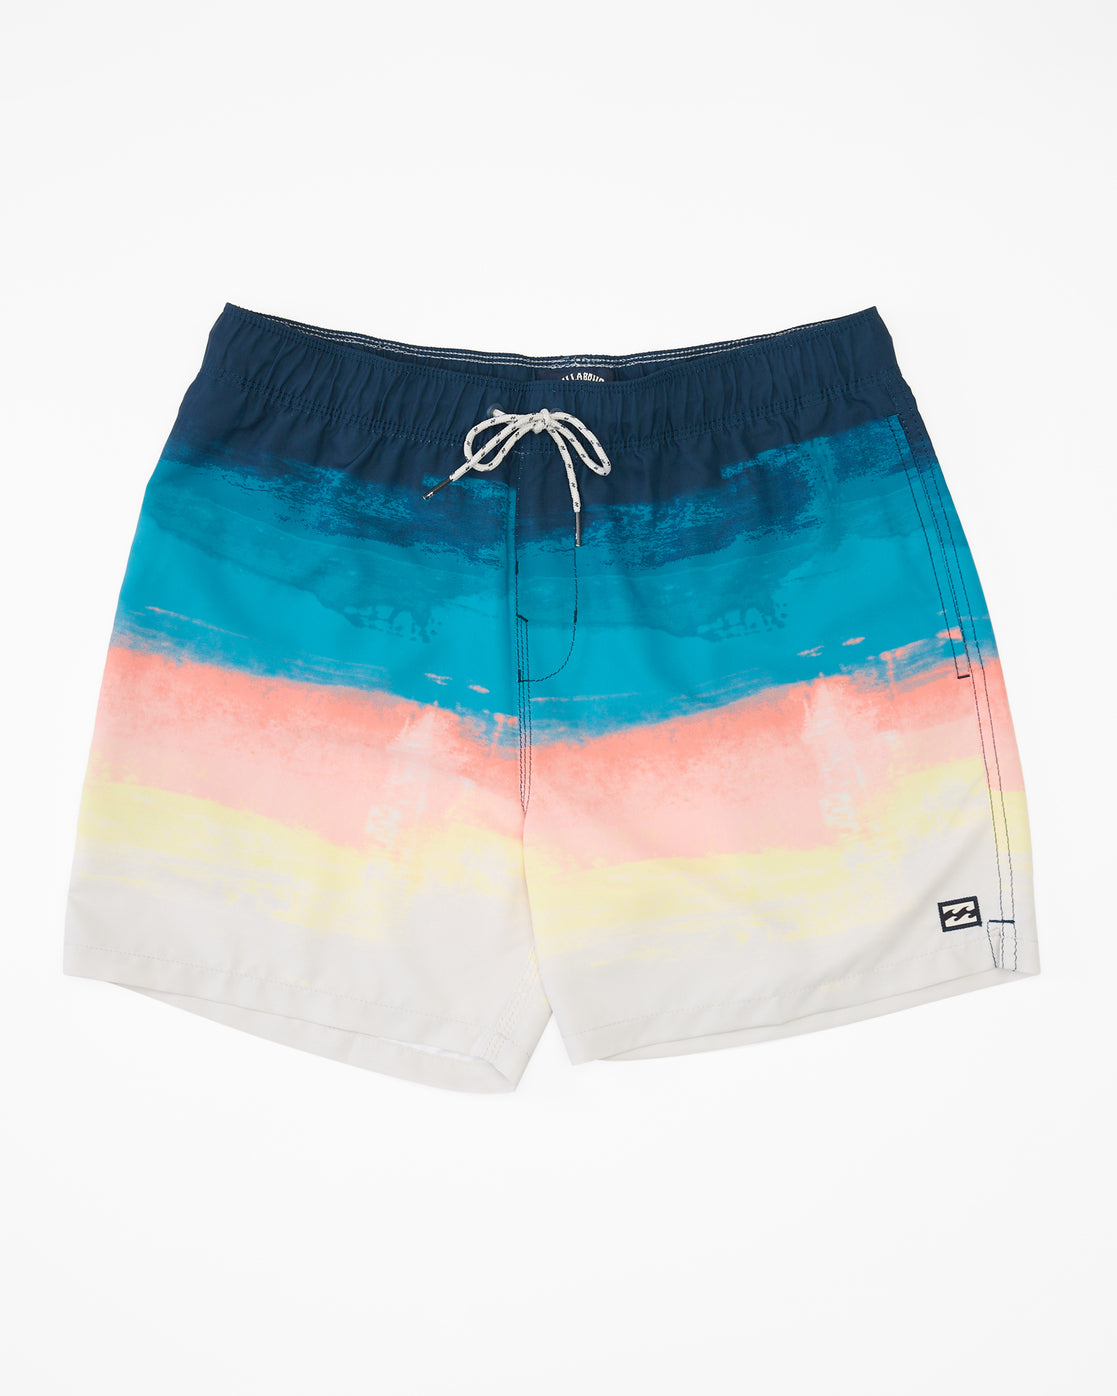 Good Times Layback Boardshorts 16” - ABYBS00287